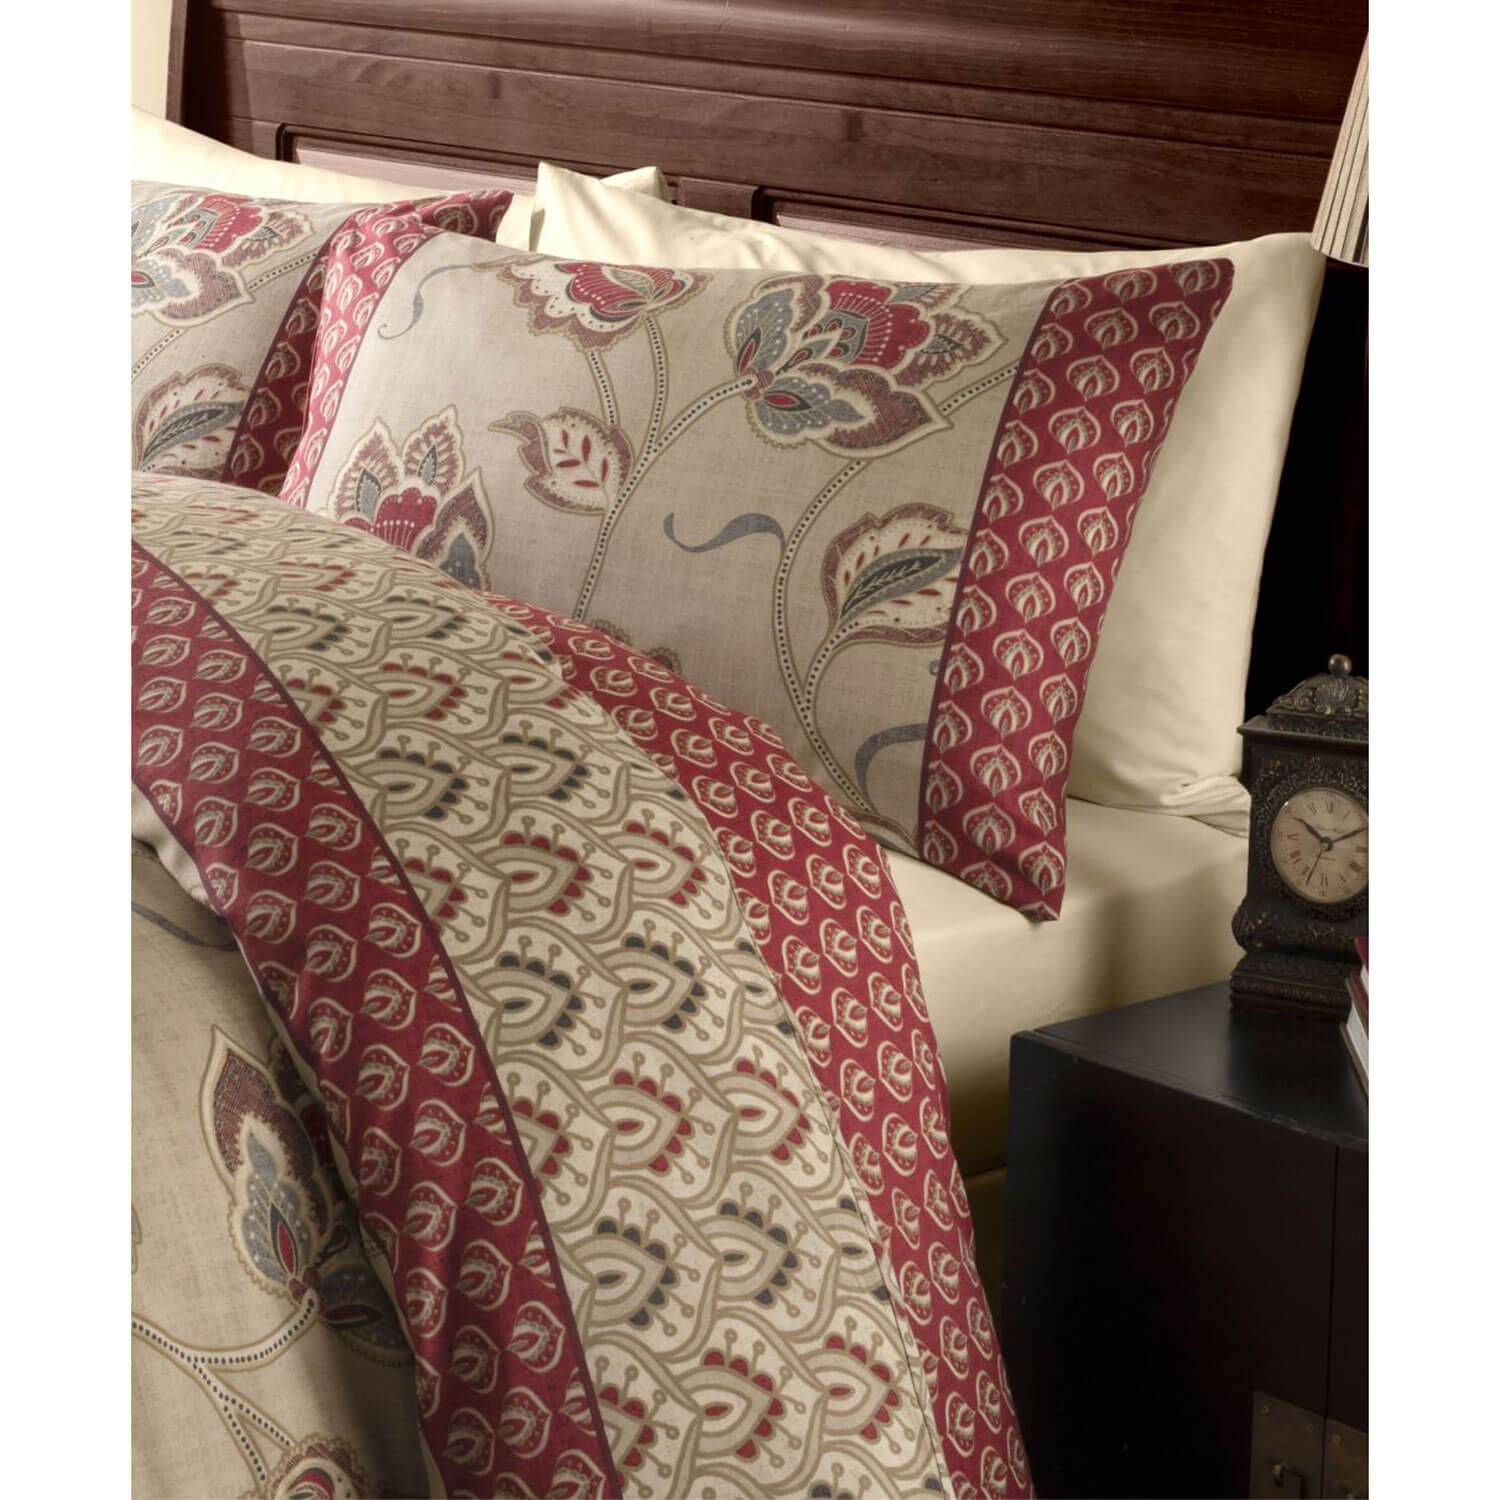  The Home Collection Kashmir Duvet Cover Set 2 Shaws Department Stores